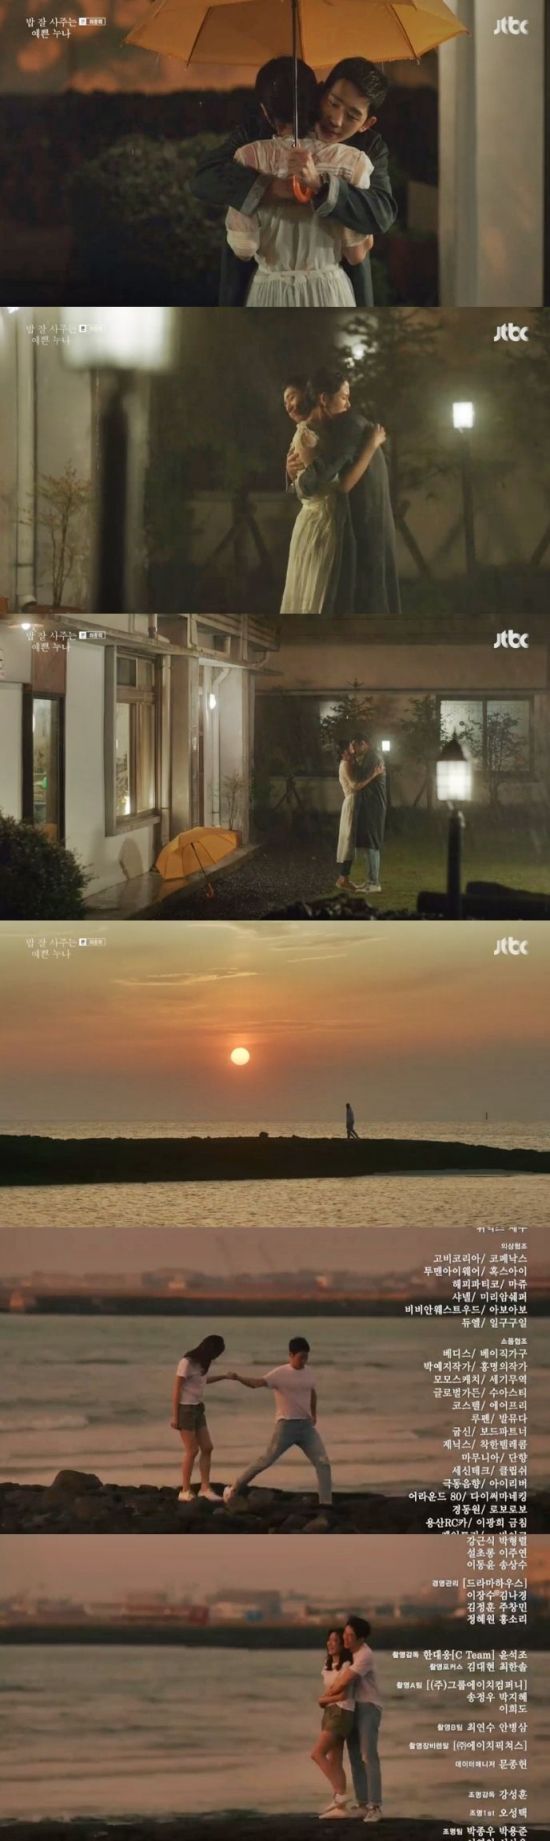 Bob is a pretty sister who buys rice well Son Ye-jin Jung Hae In made love.JTBCs gilt drama Bob Good Sister (played by Kim Eun-wa and director Ahn Pan-seok, hereinafter referred to as Pretty Sister), which was broadcast on the 19th, was finished with Happy Endings after the turn of Yoon Jin-ah (Son Ye-jin) Seo Jun-hee (Jung Hae In).On this day, Yoon Jin-ah could not hide his embarrassment after reuniting with his lover Seo Jun-hee, who broke up at his brother Yoon Seung-ho (Wha-joon) marriage ceremony.Yoon Jin-ah was caught by Seo Jun-hee who is currently in an unloved relationship, but both Seo Jun-hee and Yoon Jin-ah turned away from each other.But it began to emerge that Seo Jun-hee and Yoon Jin-ah are not forgetting each other.Seo Jun-hee wandered for years without forgetting Yoon Jin-ah, and Yoon Jin-ah also spent an unfortunate time meeting his parents favorite opponent and feeling happy at all, and never forgeting Seo Jun-hee.Seo Jun-hee and Yoon Jin-ah realized that their minds toward each other have not changed yet.Nevertheless, Yoon Jin-ah insisted on returning between Seo Jun-hee and his sister in the past, and Seo Jun-hee wanted to re-hold the heart of Yoon Jin-ah.Seo Jun-hee then went drunk and visited Yoon Jin-ah and expressed his heart that he could not go back to the past, but Yoon Jin-ah insisted on returning to the past.Later, Yoon Jin-ah exploded at the Seo Jun-hee horse, It was bad and exploded his feelings; Yoon Jin-ah said, What did I do so wrong?You said we should leave everything behind. You didnt want to see it. It was an excuse. Tell me what it was.You left me like that, and I didnt live comfortably. I was hanging on the edge of the cliff.And I hated me hanging around like a clutter. I hated Haru Haru and resented me. You are not the hell. Do you know? After leaving the company, Yon Jin-ah chose to break up with her boyfriend and then left for Jeju Island to start a new life.At this time, Seo Jun-hee said, I suddenly remembered what I wanted to say to you. Thank you so much for loving me.You dont know how grateful and happy I am. Im acting a lot. Love is a heart that pours out for one person.So when you love, youre like Seo Jun-hee. Jun-hee, I love you. I love Savoie a lot.Savoie I will love you for a long time. I once again realized my love by listening to the recording message left when I loved Yoon Jin-ah.Yoon Jin-ah told the gold bora (residents) that he had arranged his feelings for Seo Jun-hee, saying, Our relationship was so far.It was just that much, but eventually, when Seo Jun-hee came to Jeju Island, all the situation changed 180 degrees.Seo Jun-hee held Yoon Jin-ah in his arms and said, Its still small, Im all wrong, Im sorry, I really cant live without Yoon Jin-ah.I am laughing, what are you looking at? But soon I accepted the heart of Seo Jun-hee and kissed hotly.